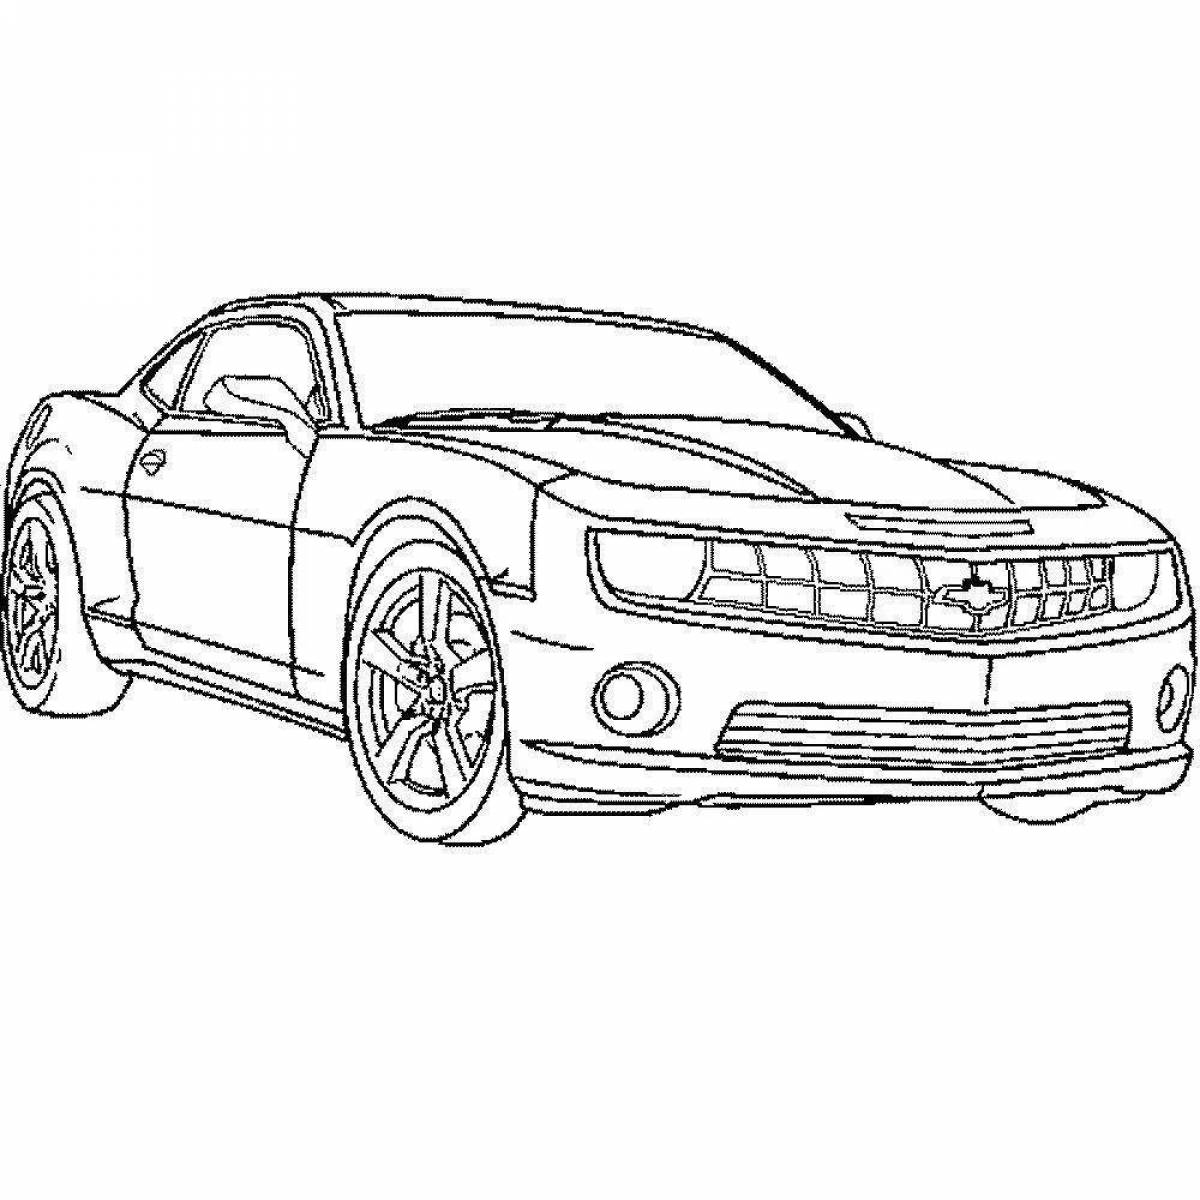 Coloring page elegant cool cars